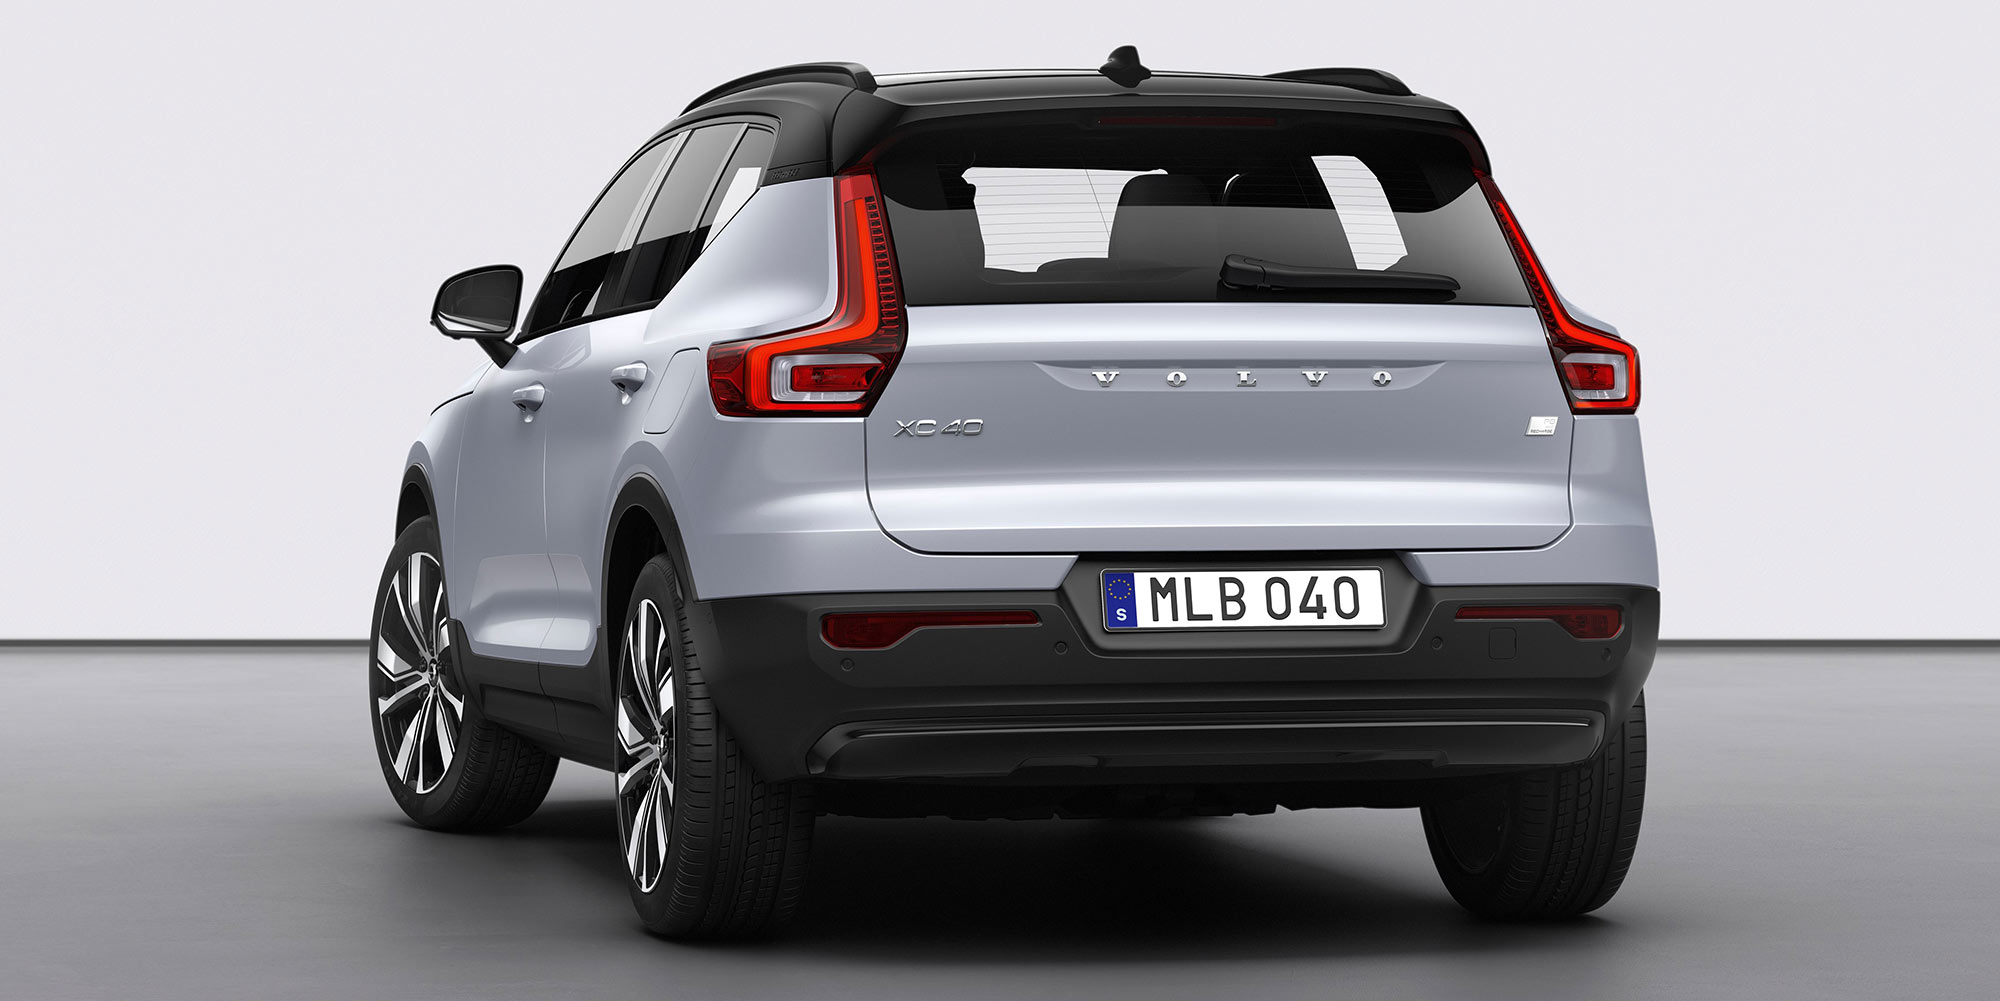 XC40 Recharge P8 AWD in Glacier Silver and 20” alloy wheels